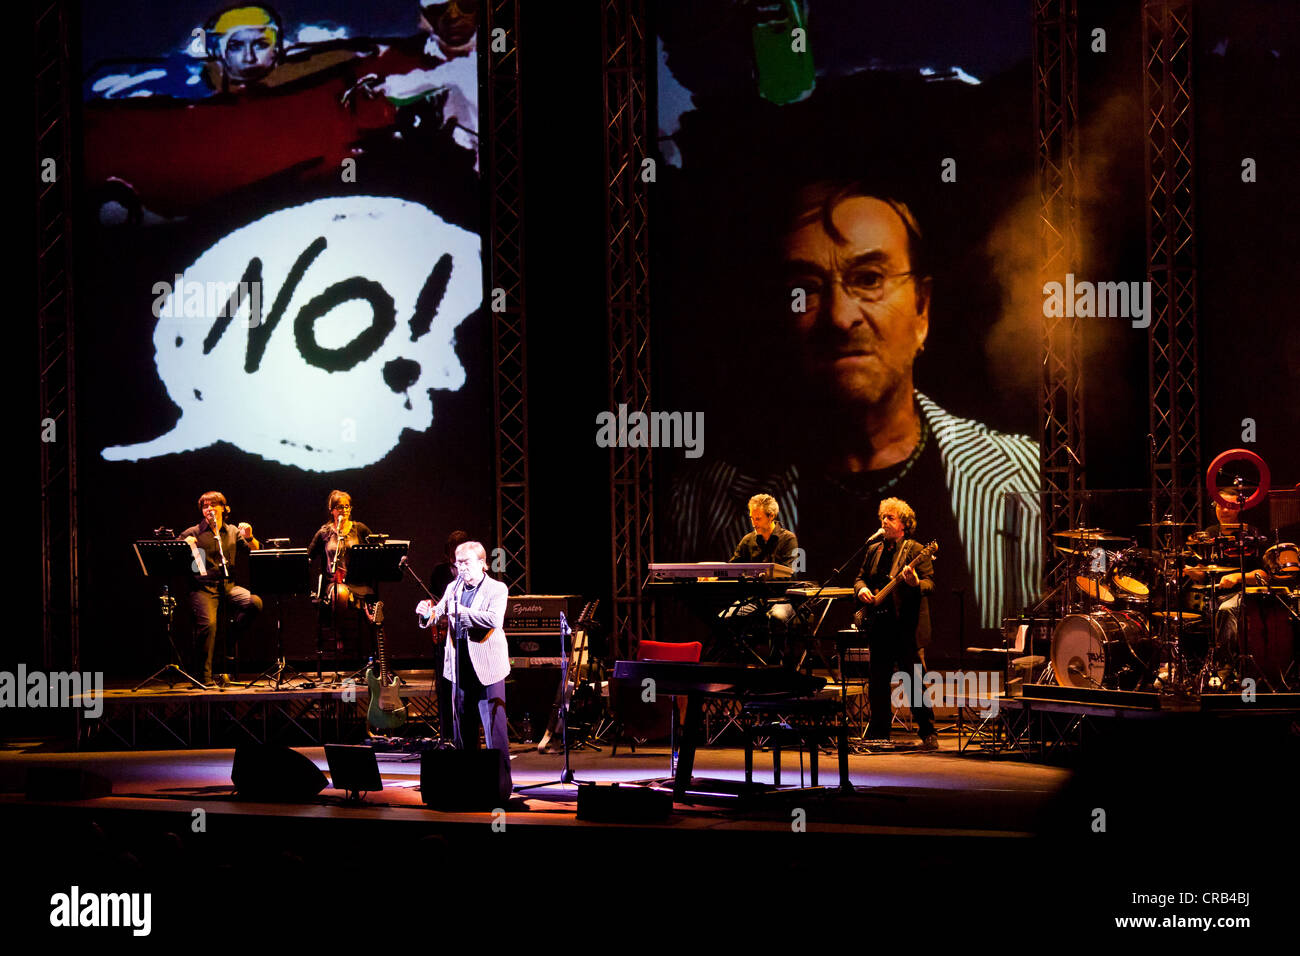 The Italian singer Lucio Dalla performing live at the concert hall of the KKL in Lucerne, Switzerland, Europe Stock Photo